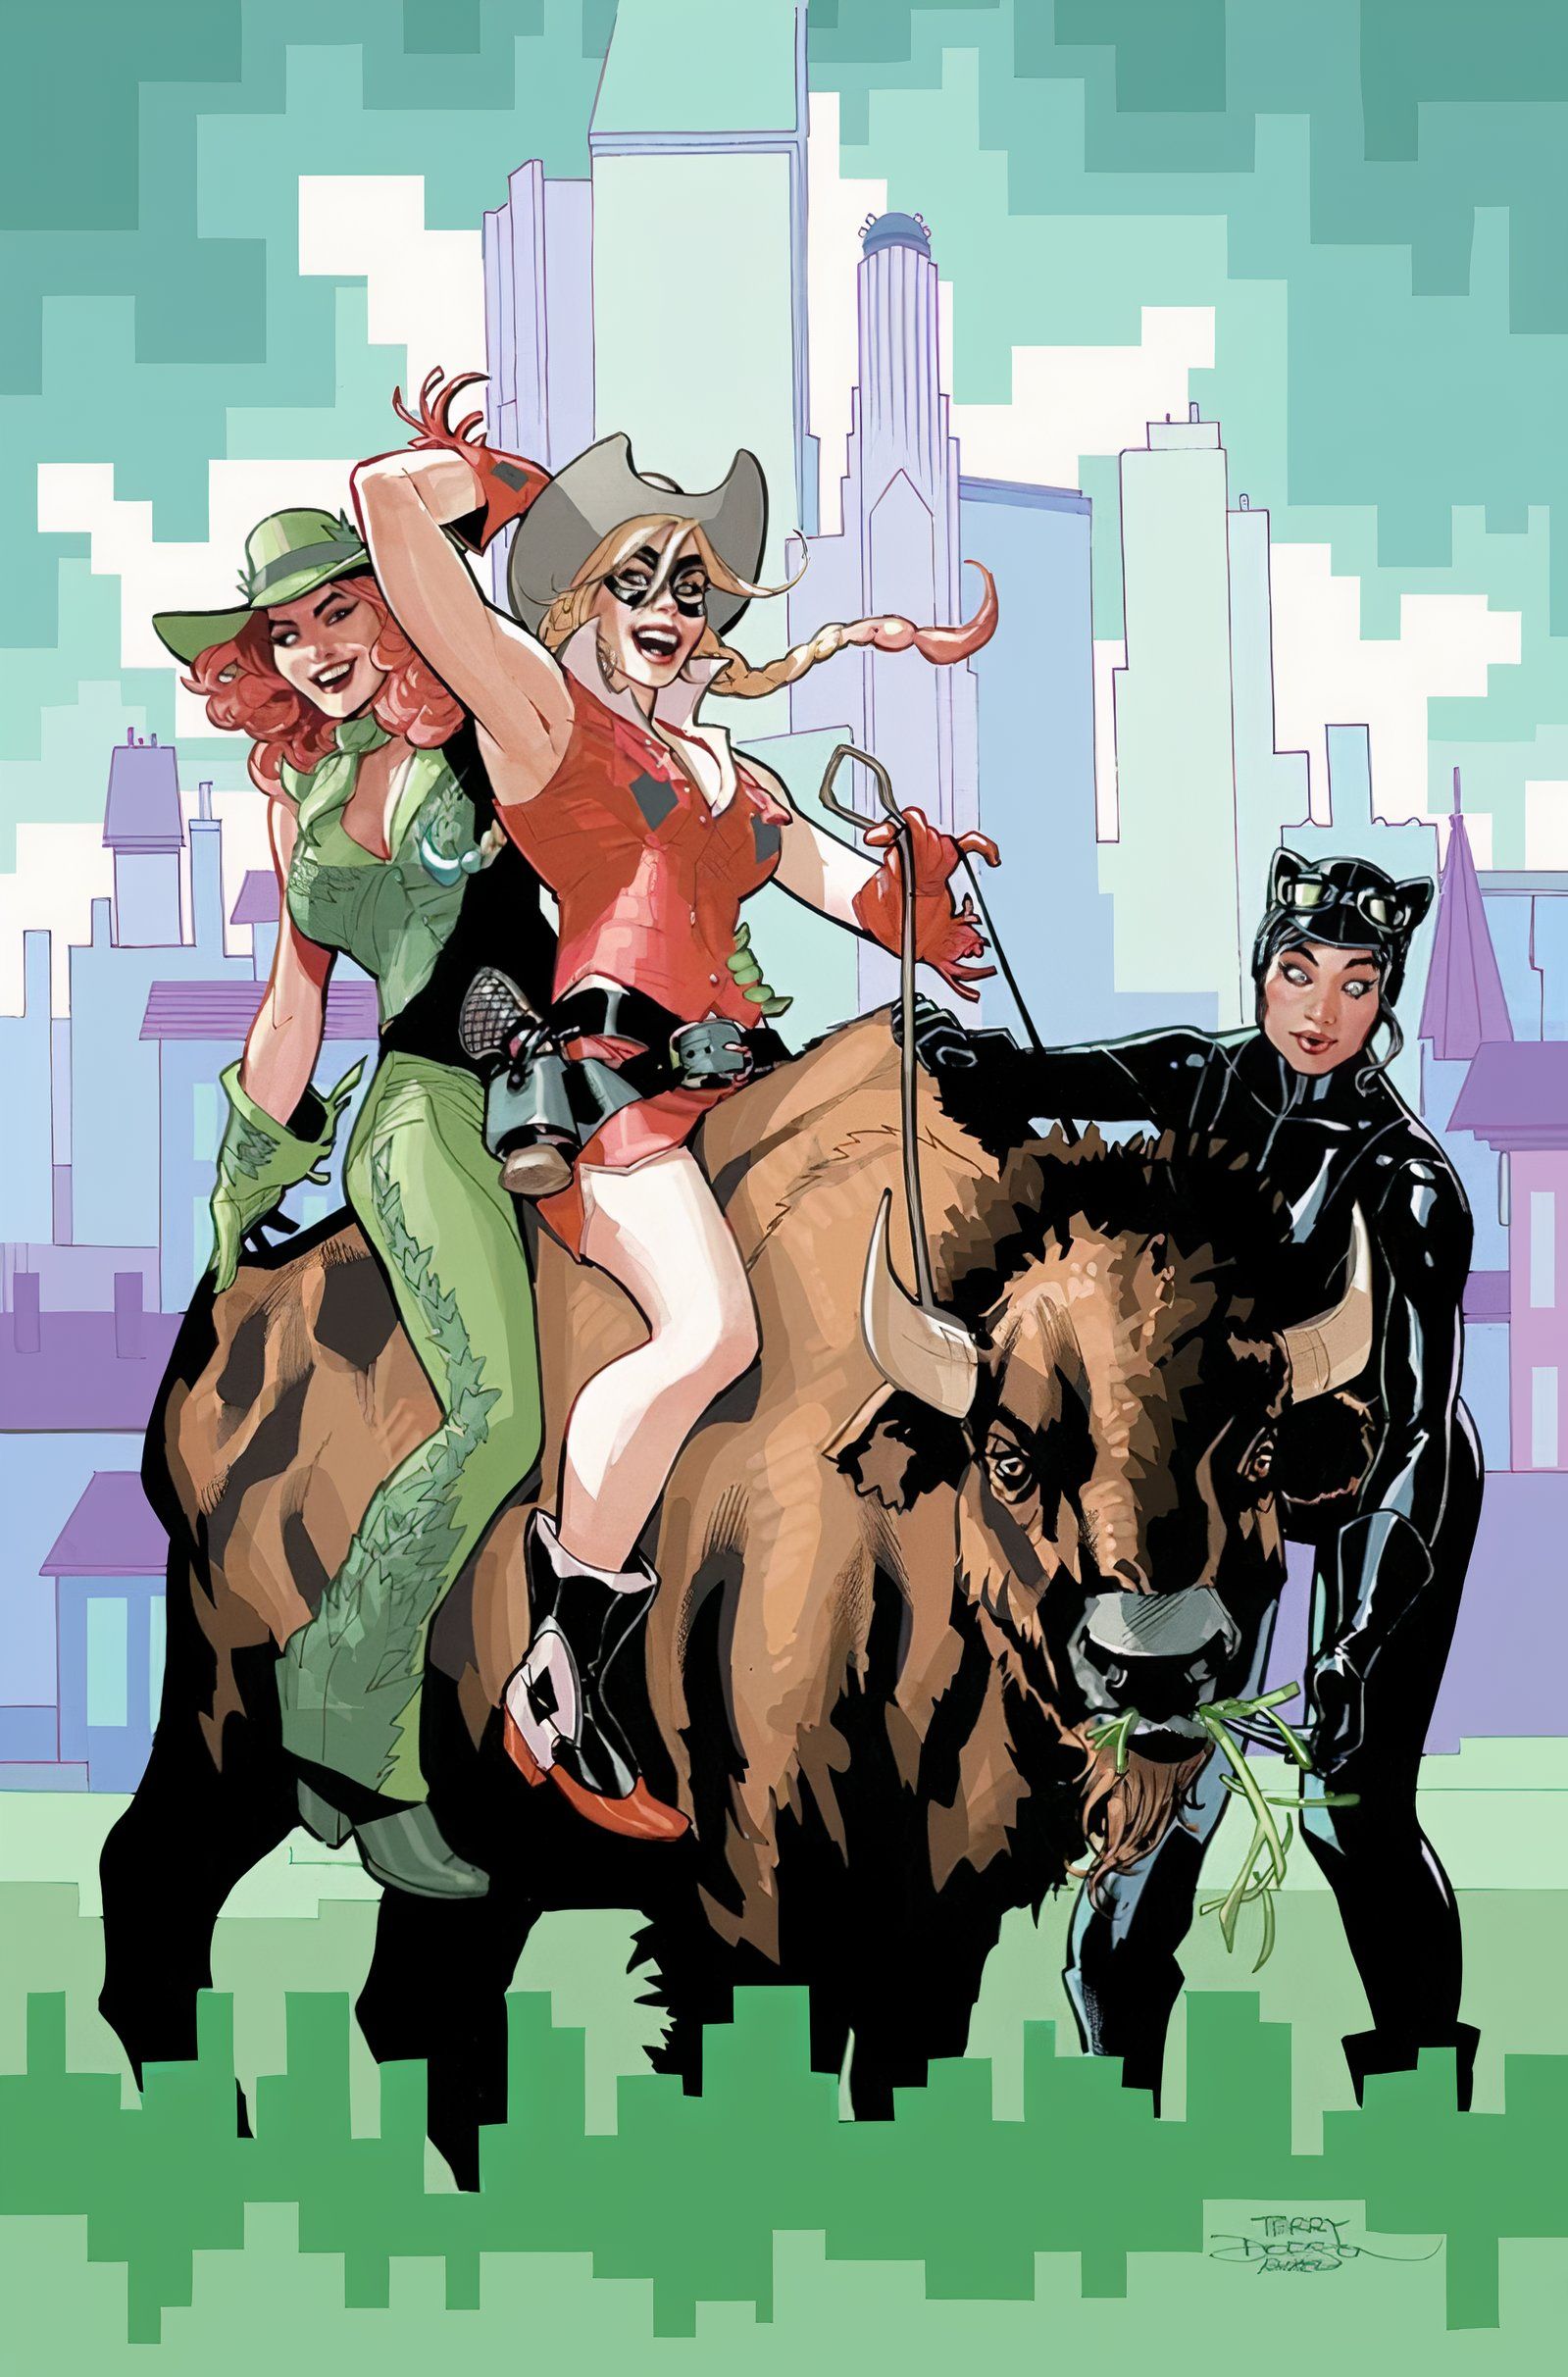 Gotham City Sirens #1 main cover, featuring Poison Ivy & Harley Quinn riding a bison, as Catwoman guides them.